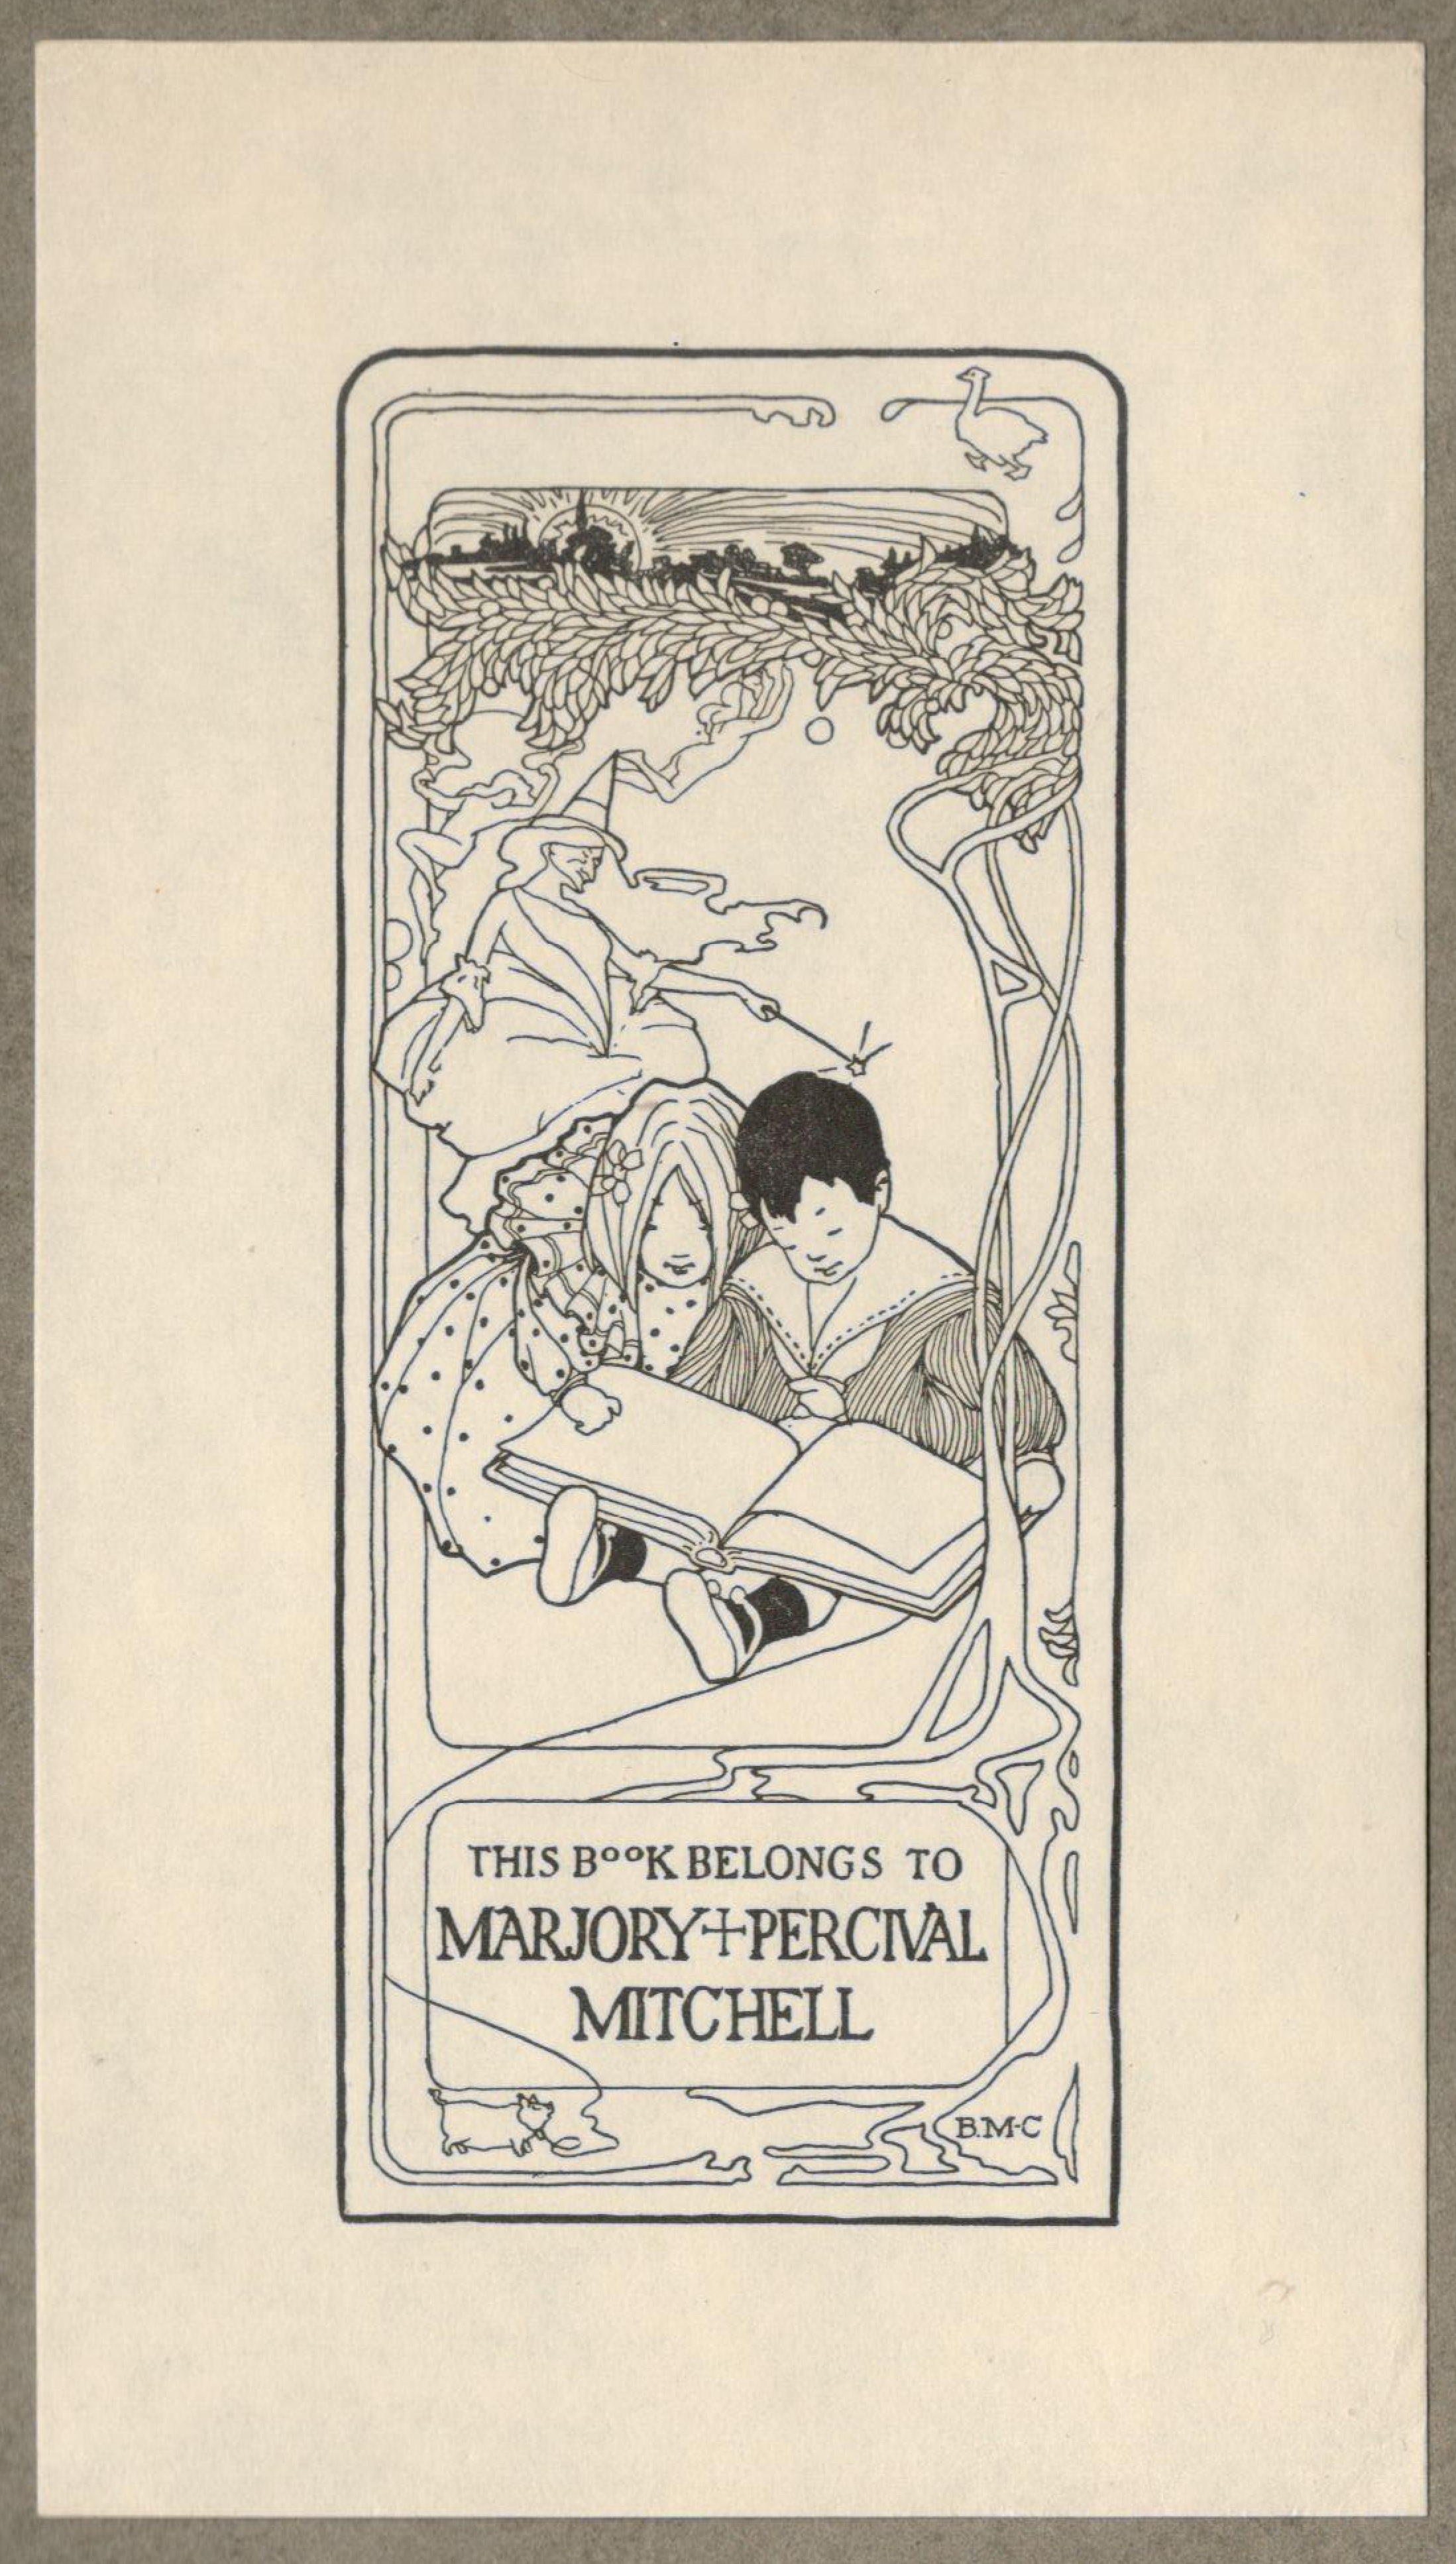 Bookplates of Marjory & Percival Mitchell